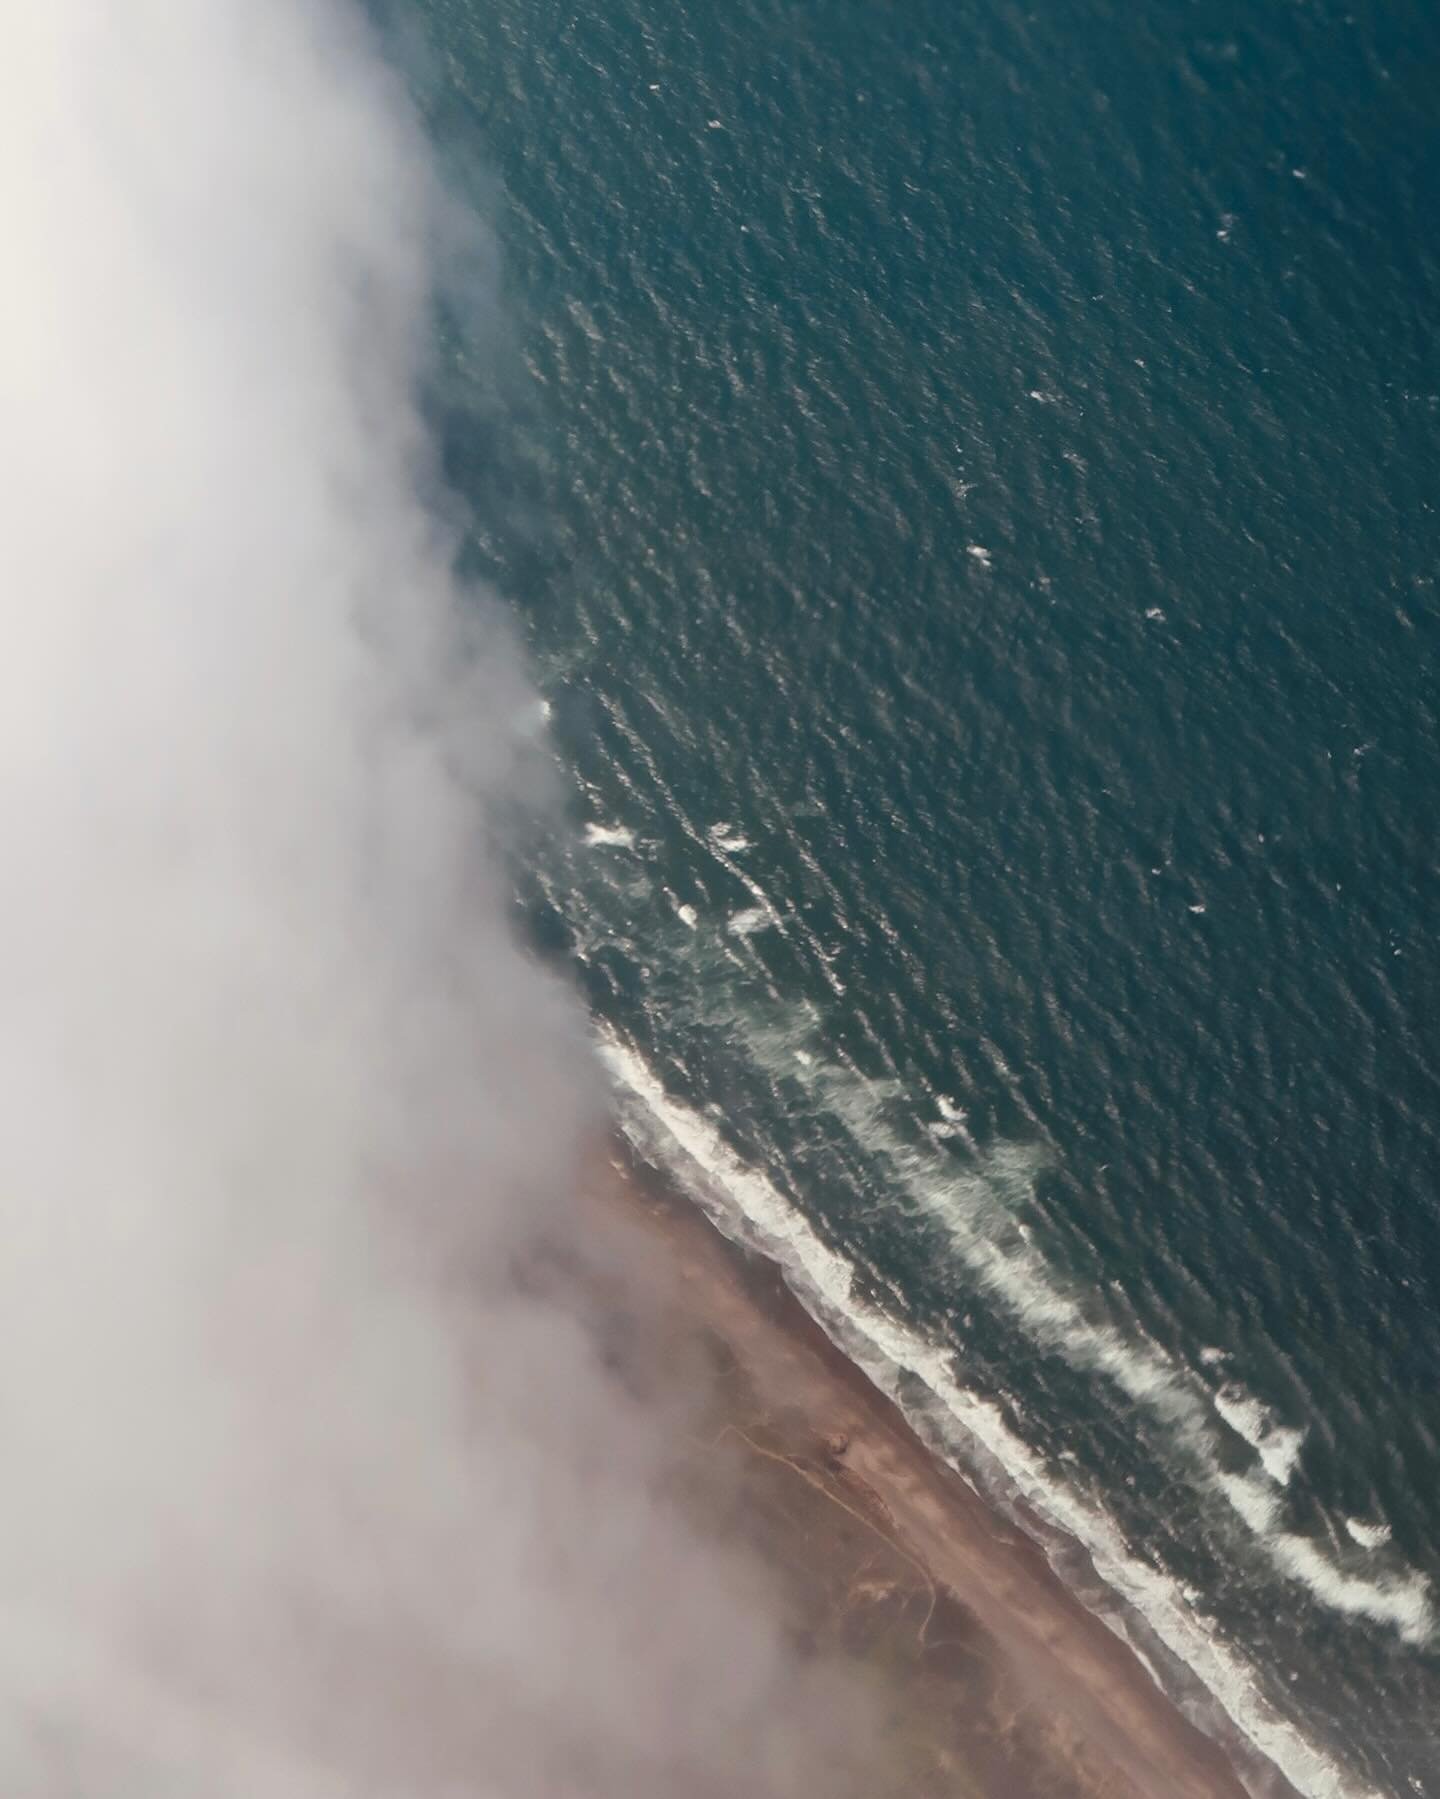 Marine Layer from above. I am used to seeing the marine layer creep in under the bridge and envelop us but sometimes when you fly into San Francisco, you&rsquo;re lucky enough to catch it crawling in from above. The last two times I&rsquo;ve flown in